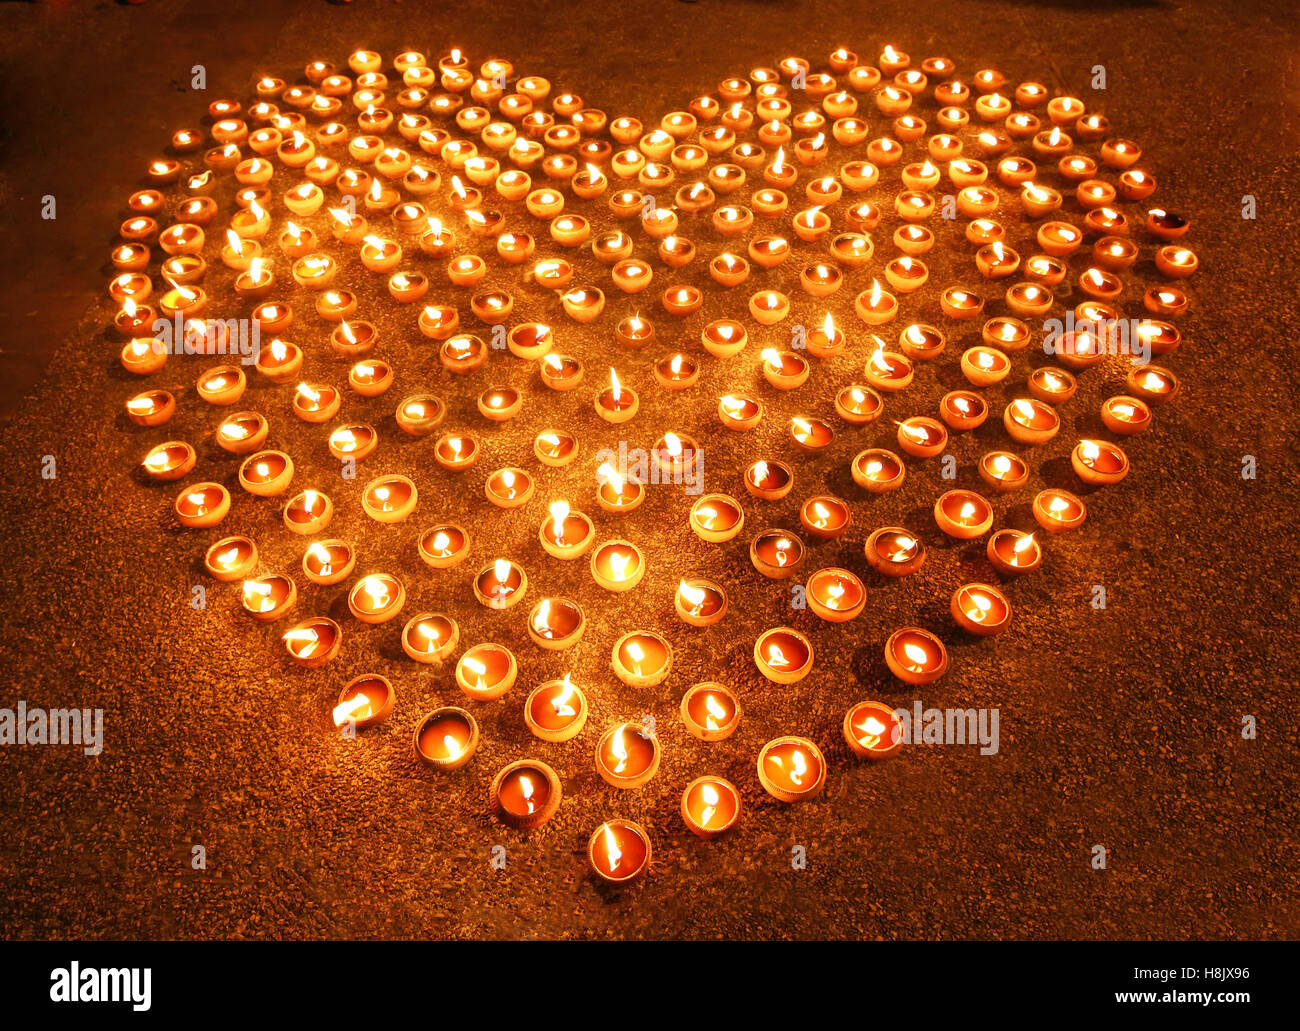 Love heart shape made out of candles and light Stock Photo